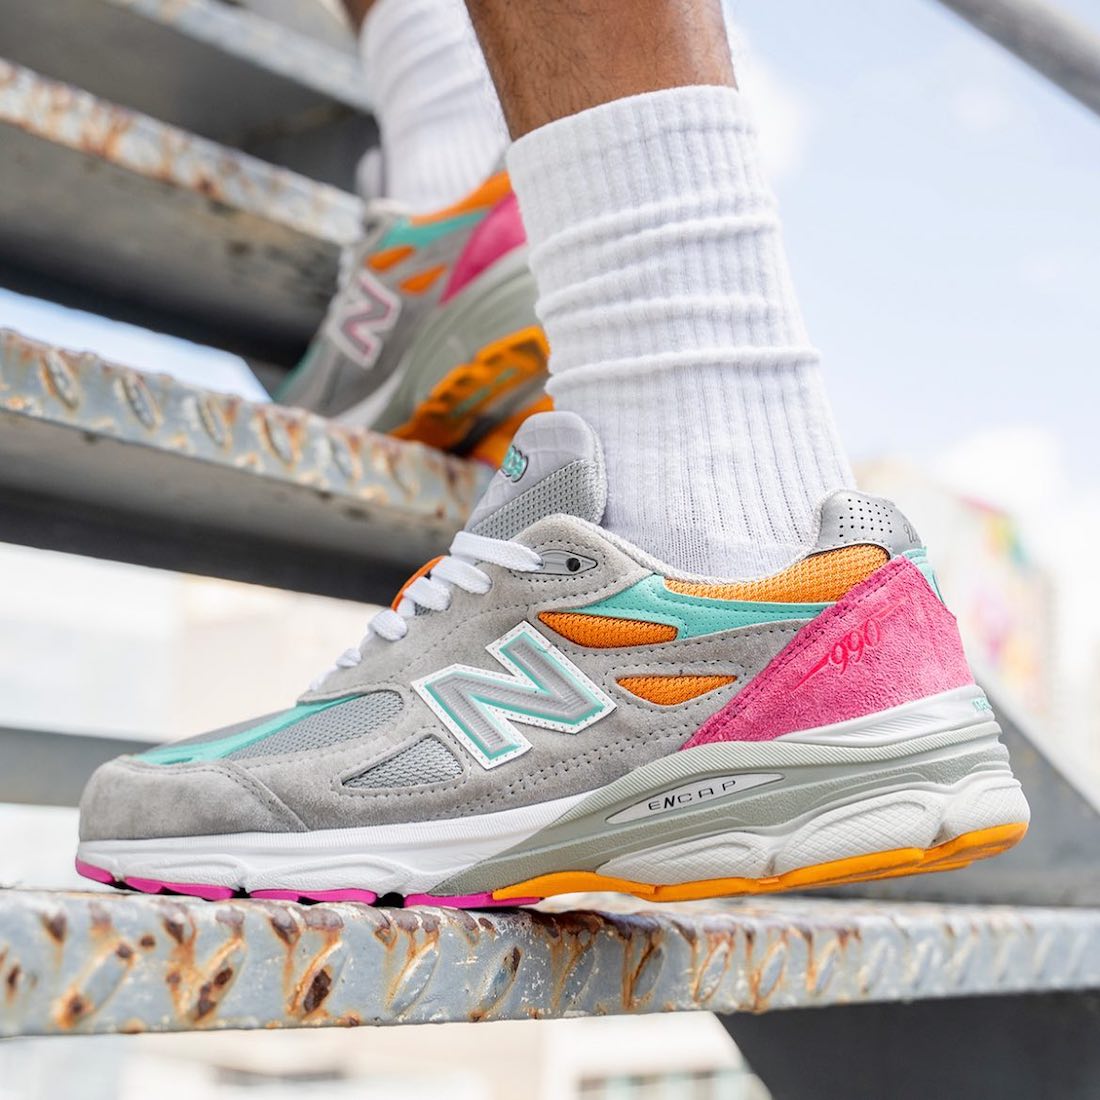 DTLR New Balance 990v3 Miami Drive Release Date Info